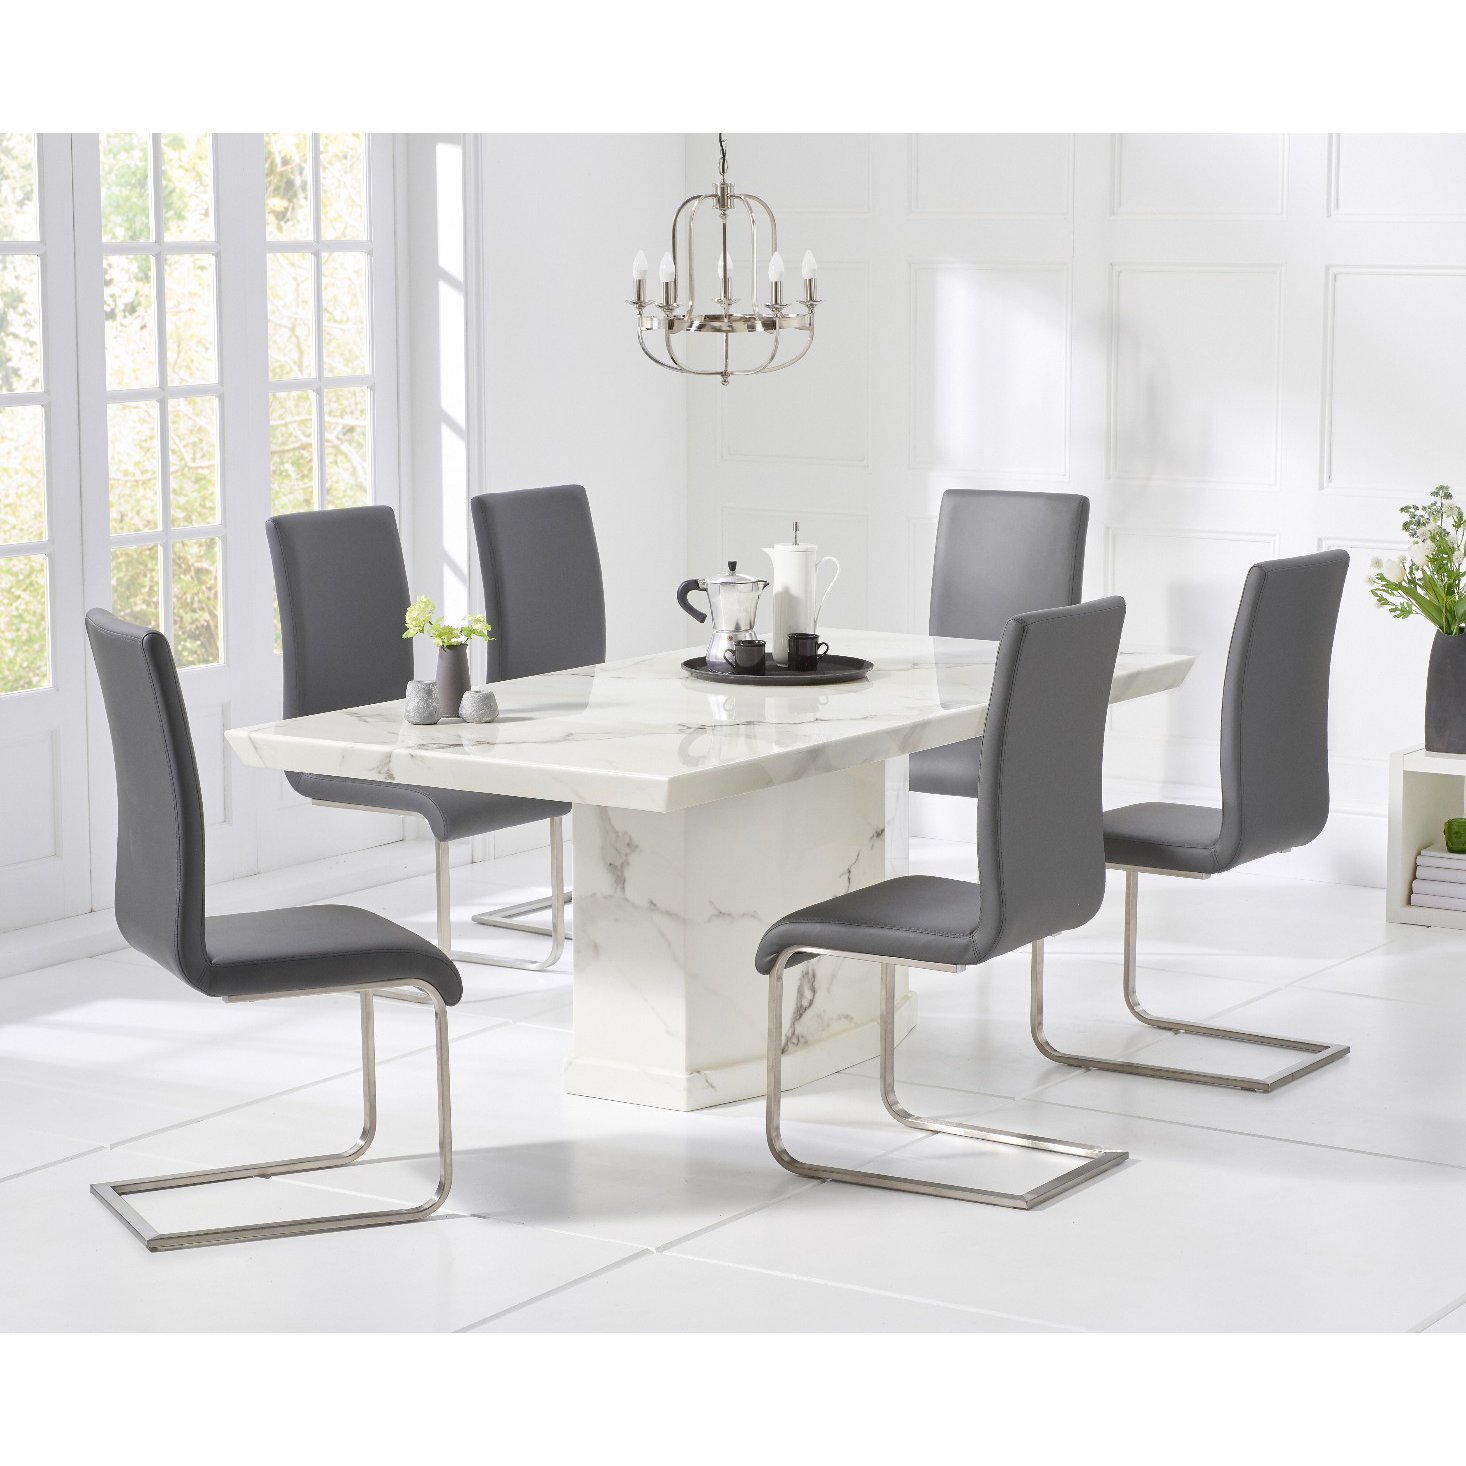 Carvelle 200cm White Pedestal Marble Dining Table With 6 Grey Austin Chairs